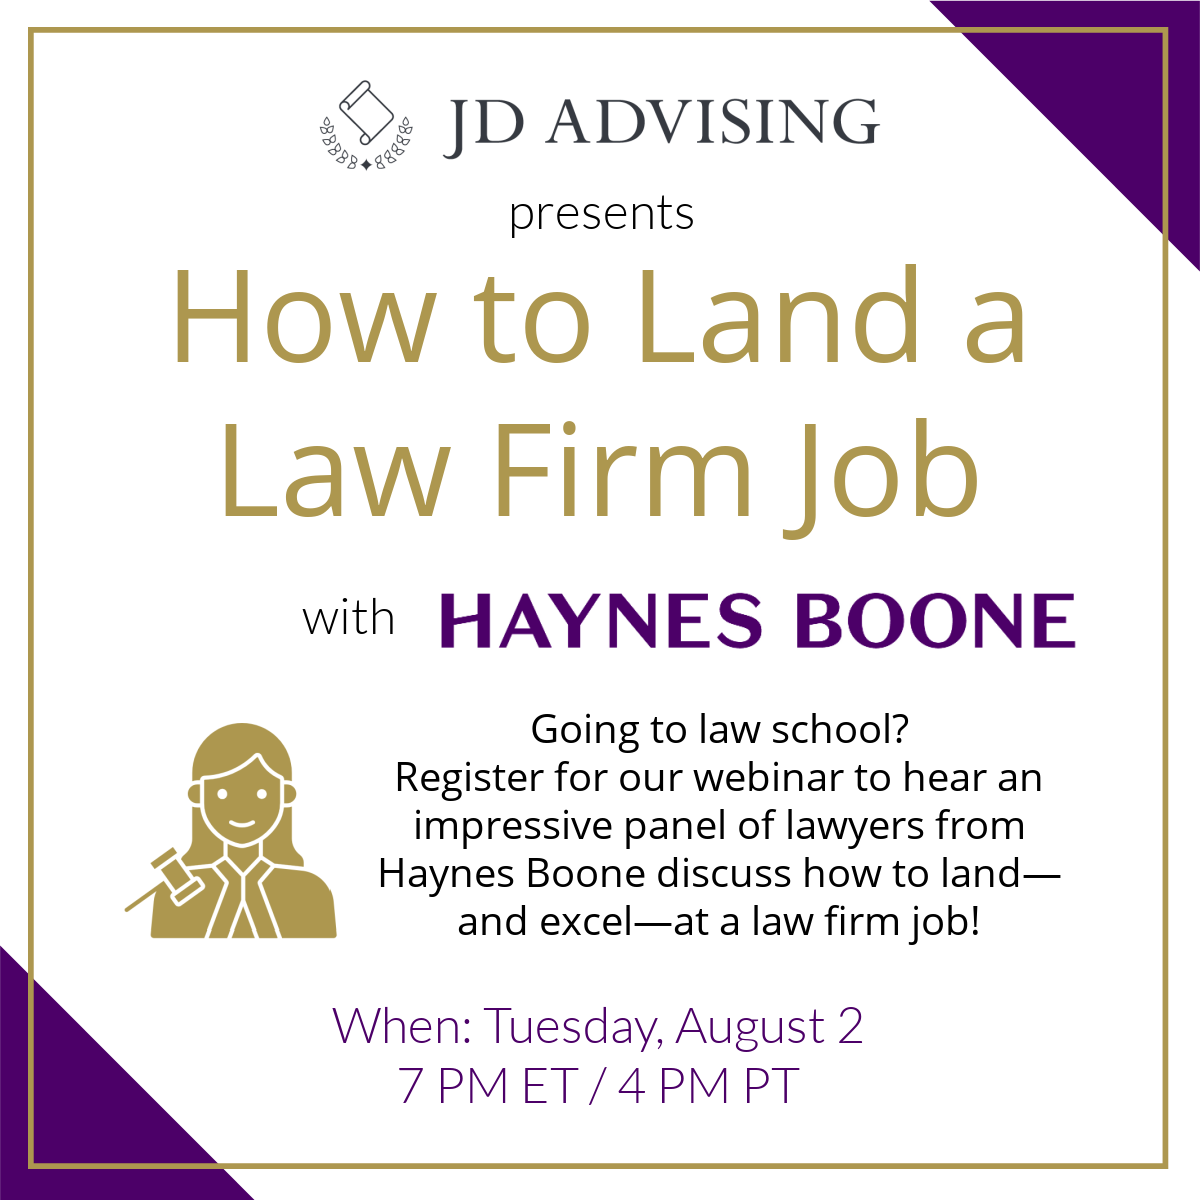 how to land a law firm job jd advising haynes boone